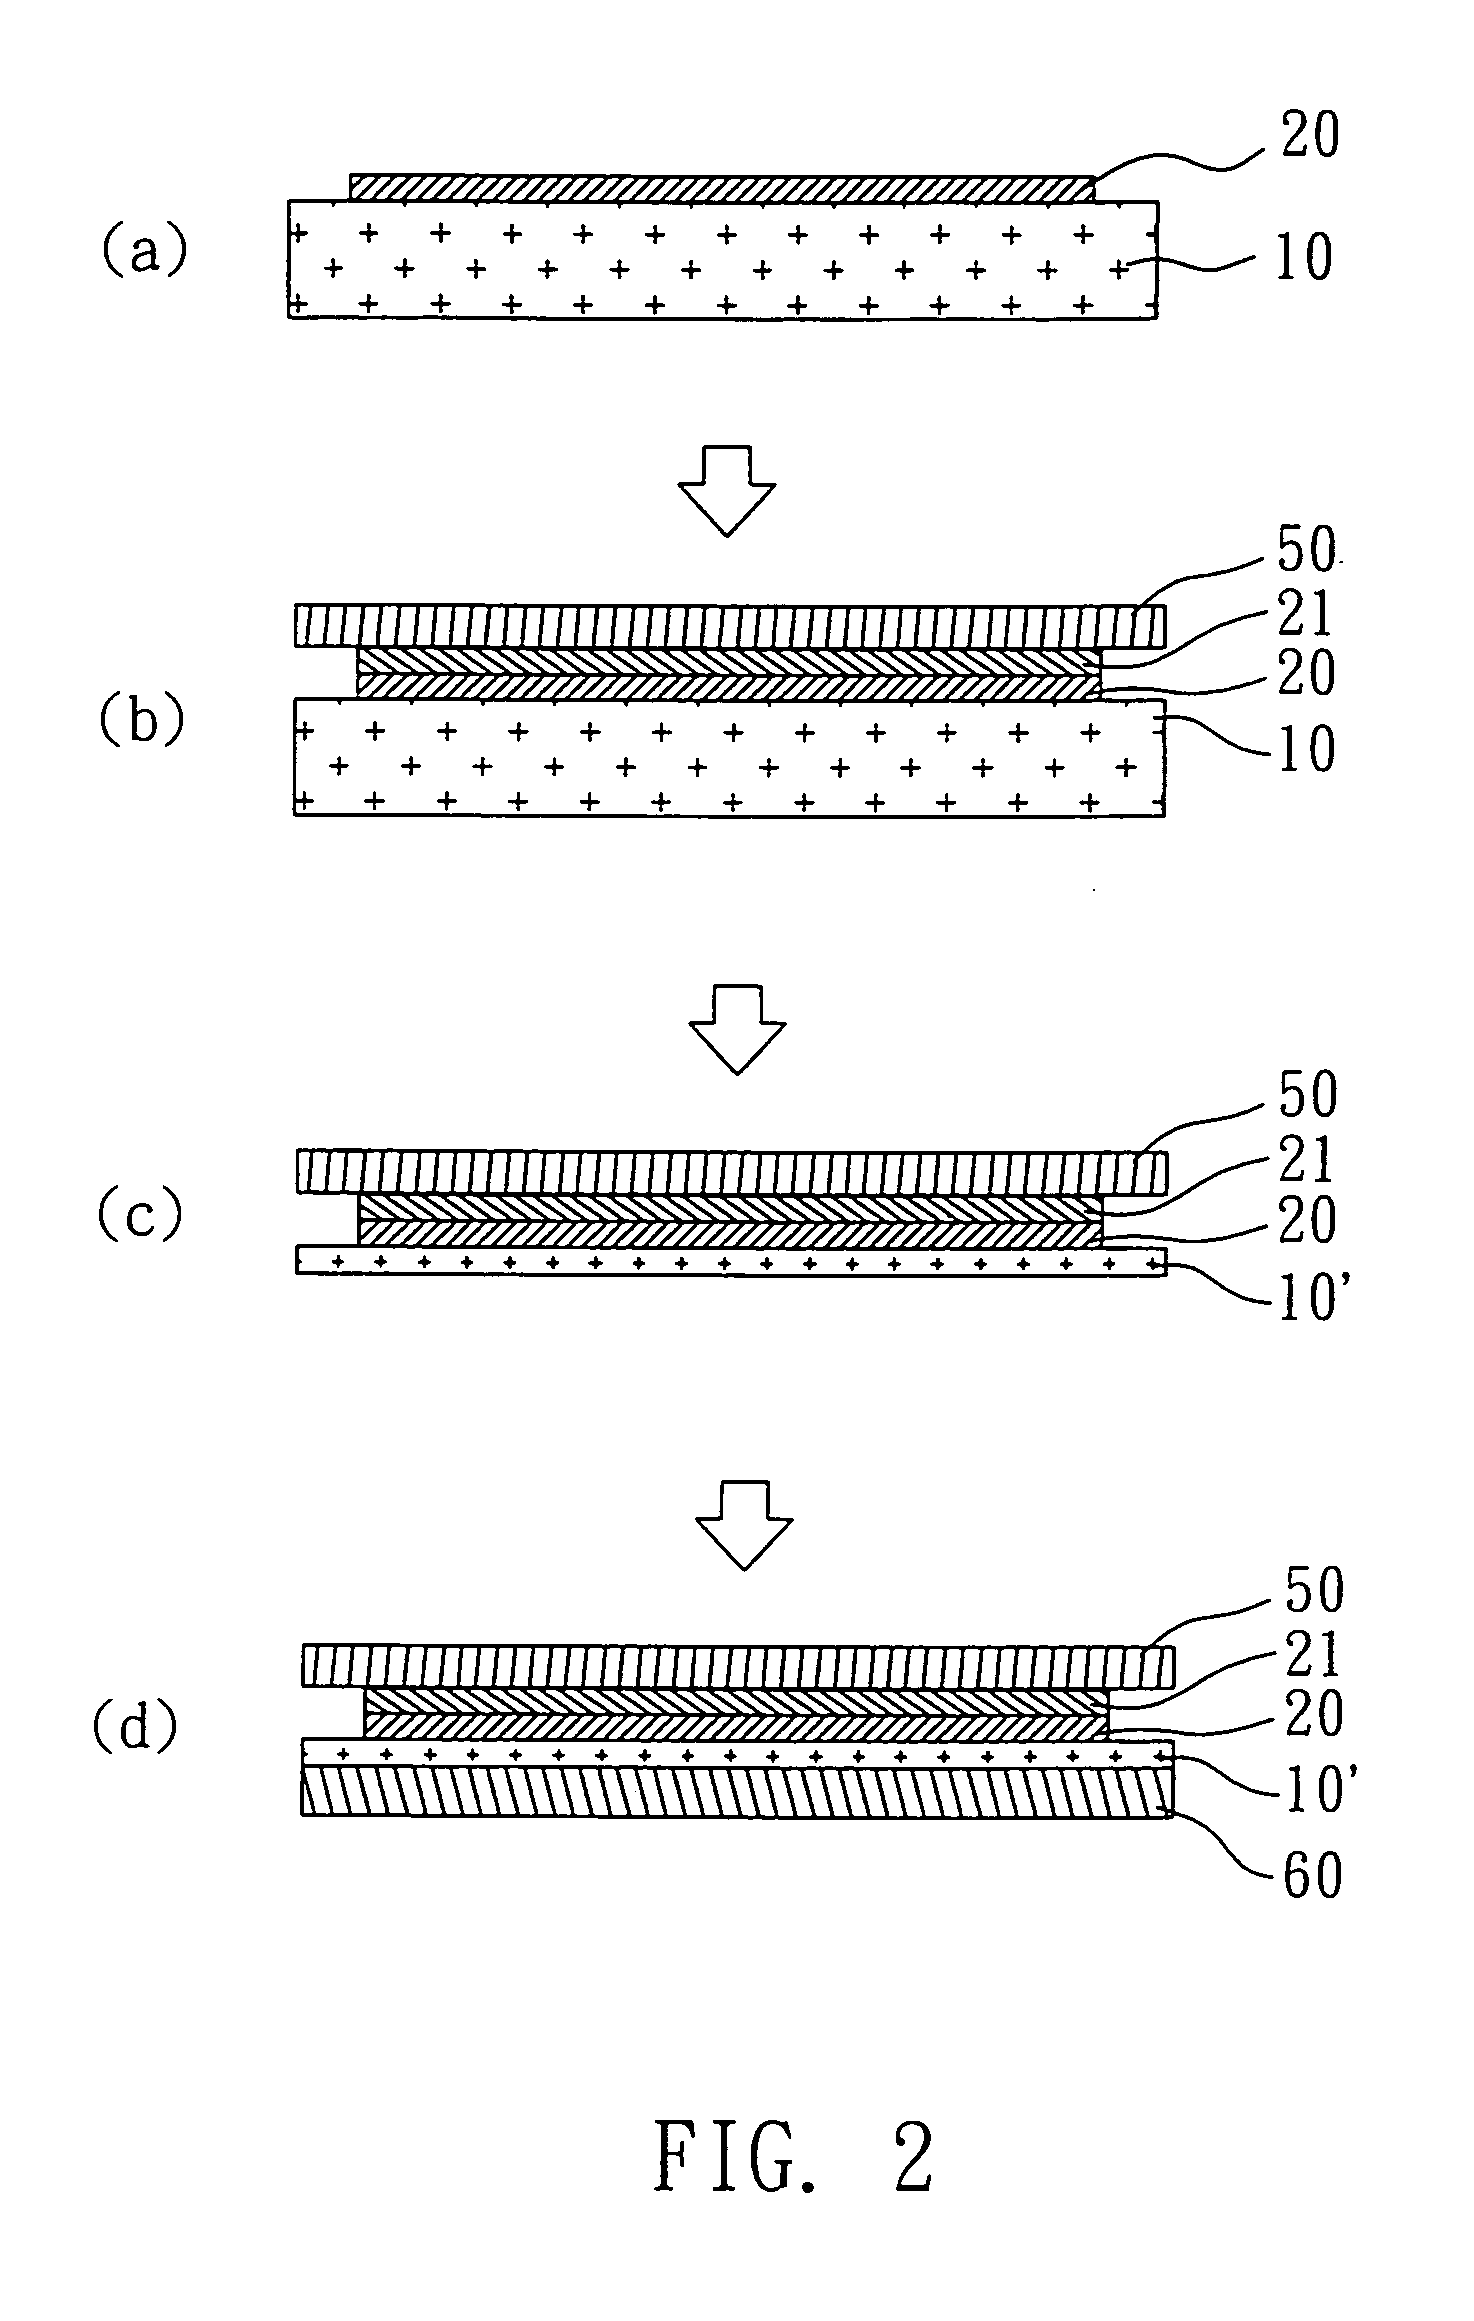 Method for manufacturing a flexible panel for a flat panel display